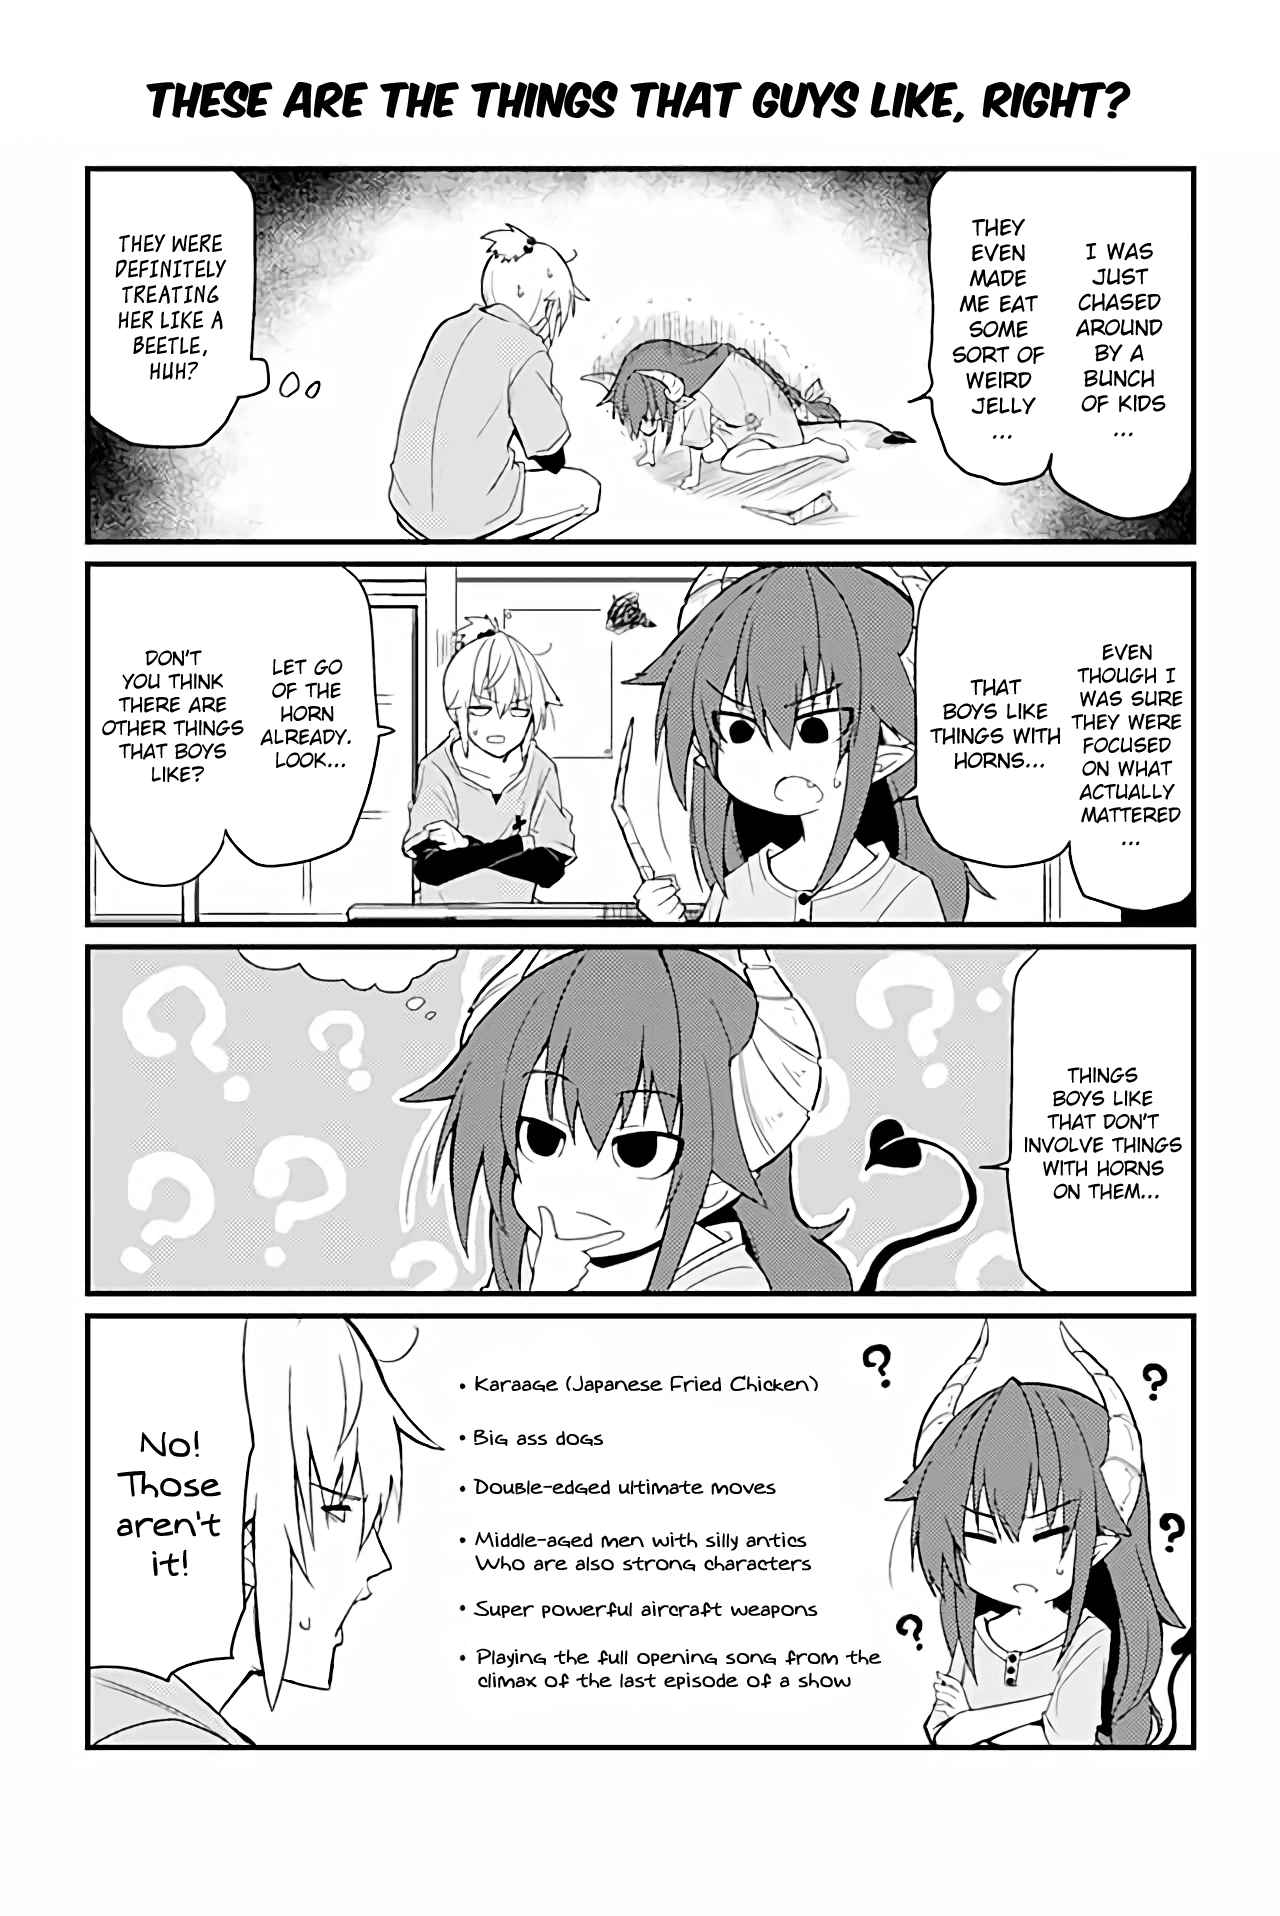 Naughty Succubus "Saki chan" Ch. 15 These are the things that guys like, right?